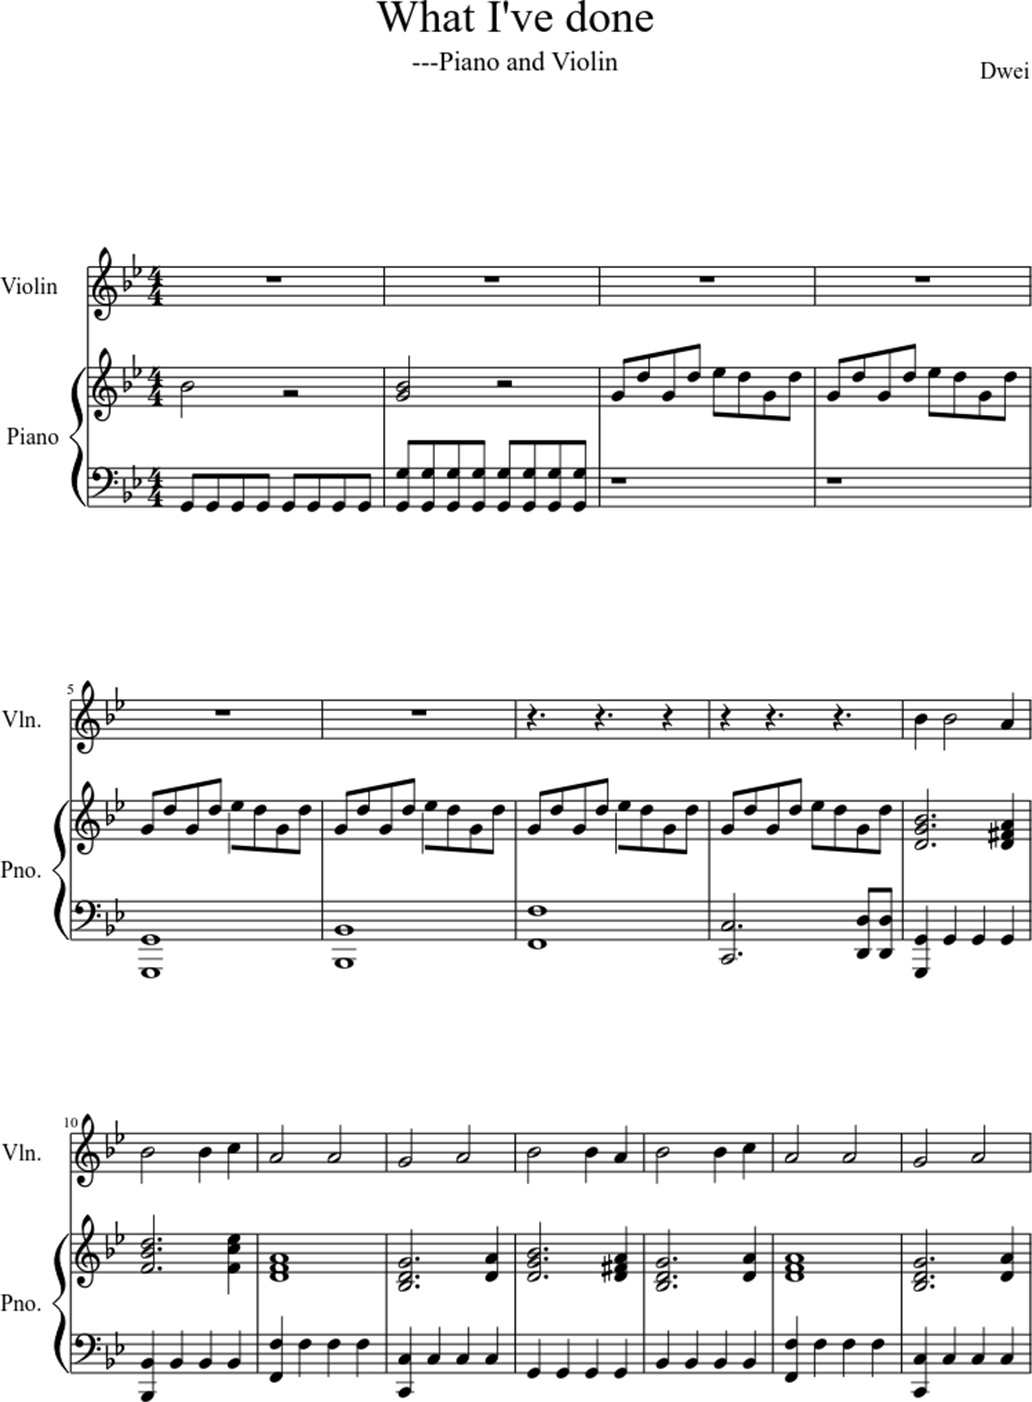 What I've done sheet music notes 1